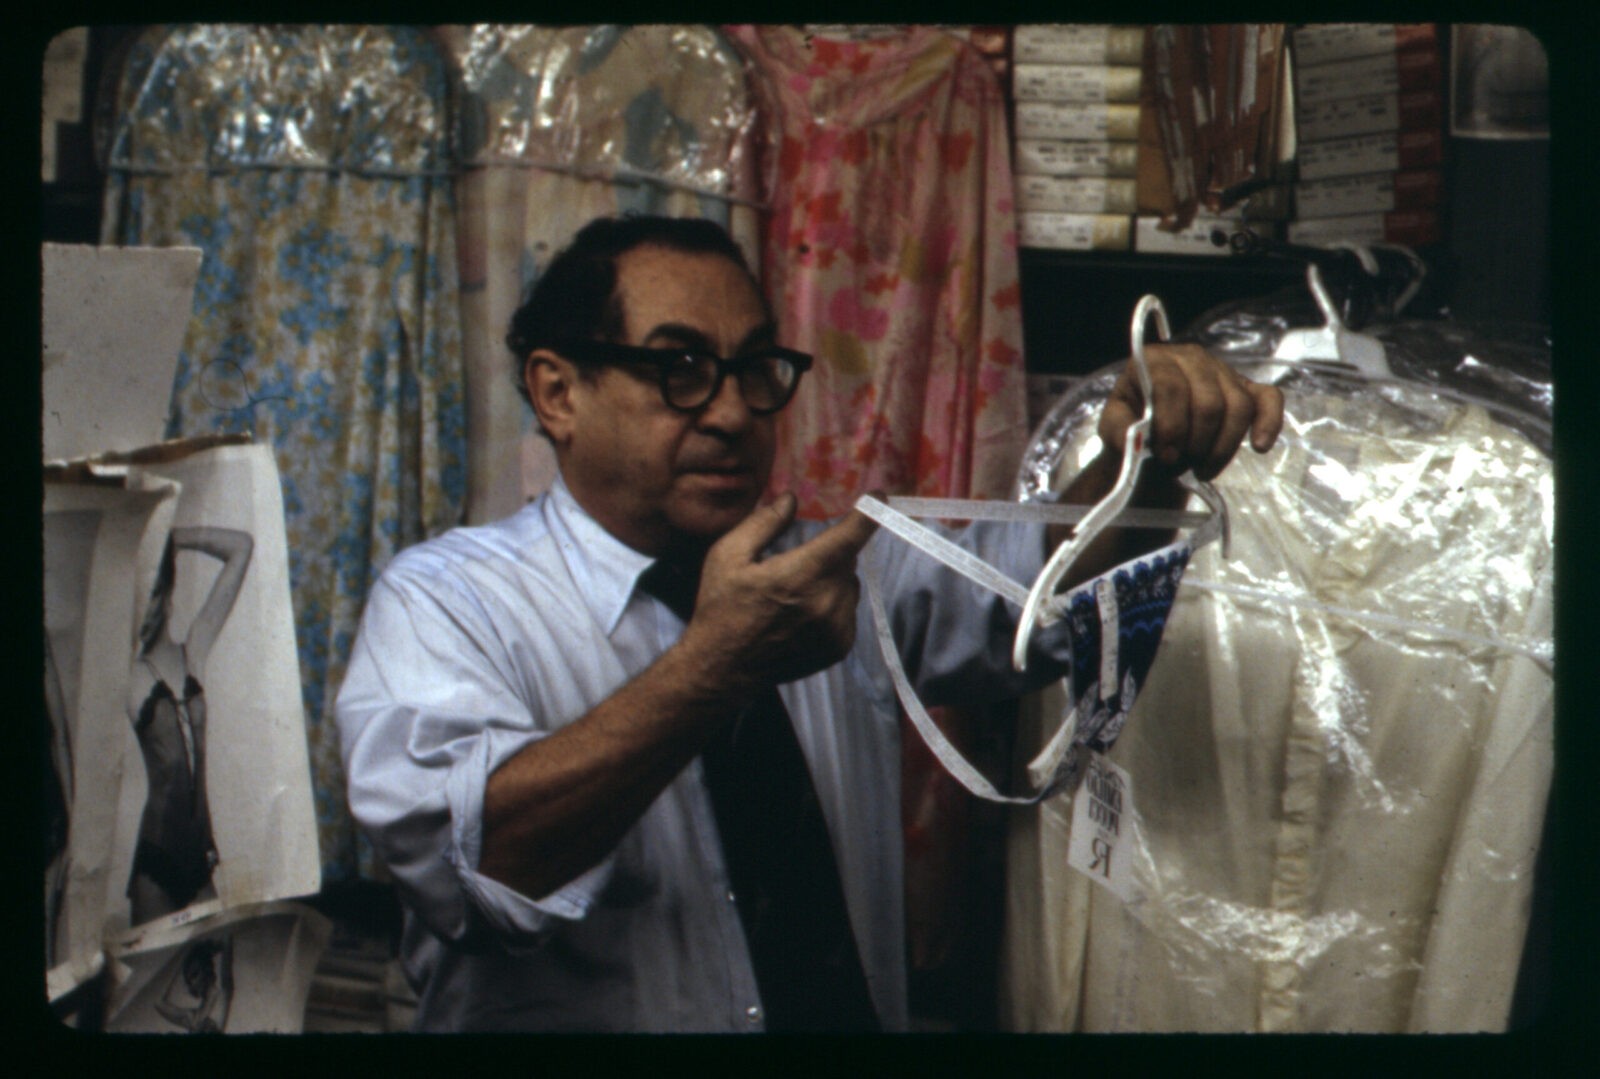 Sidney, a man with light colored skin and dark hair wears black glasses, a shirt, and tie. Surrounded by colorful garments he holds thong underwear.